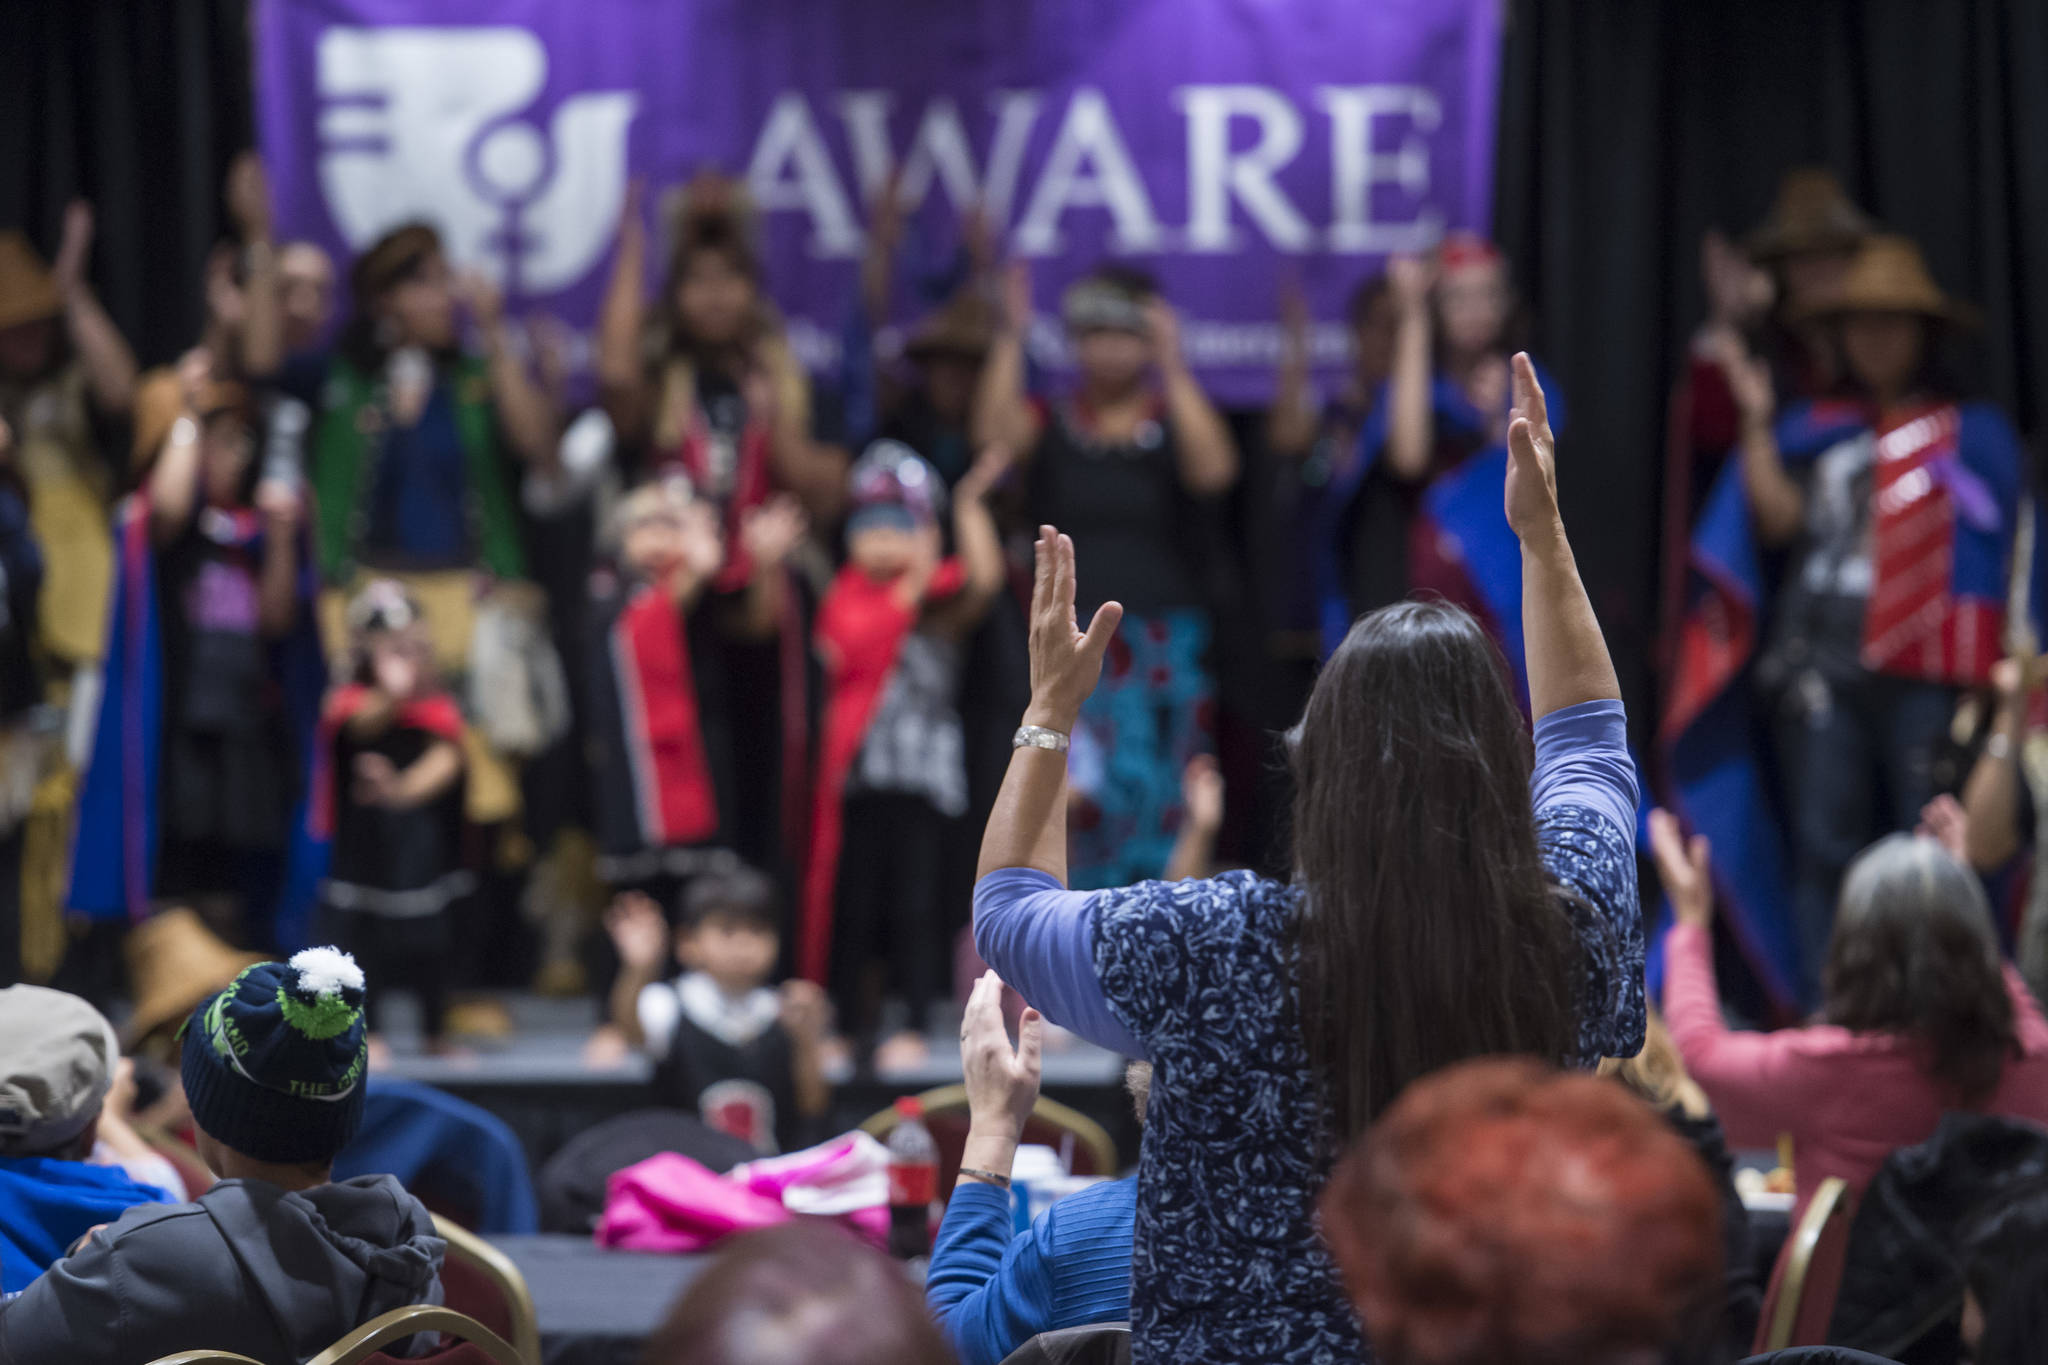 People pay tribute to the Woosh.ji.een Dance Group as they perform during a Celebrate Survivors gathering sponsored by Central Council Tlingit and Haida Indian Tribes of Alaska and AWARE in the Elizabeth Peratrovich Hall in 2018. (Michael Penn | Juneau Empire)